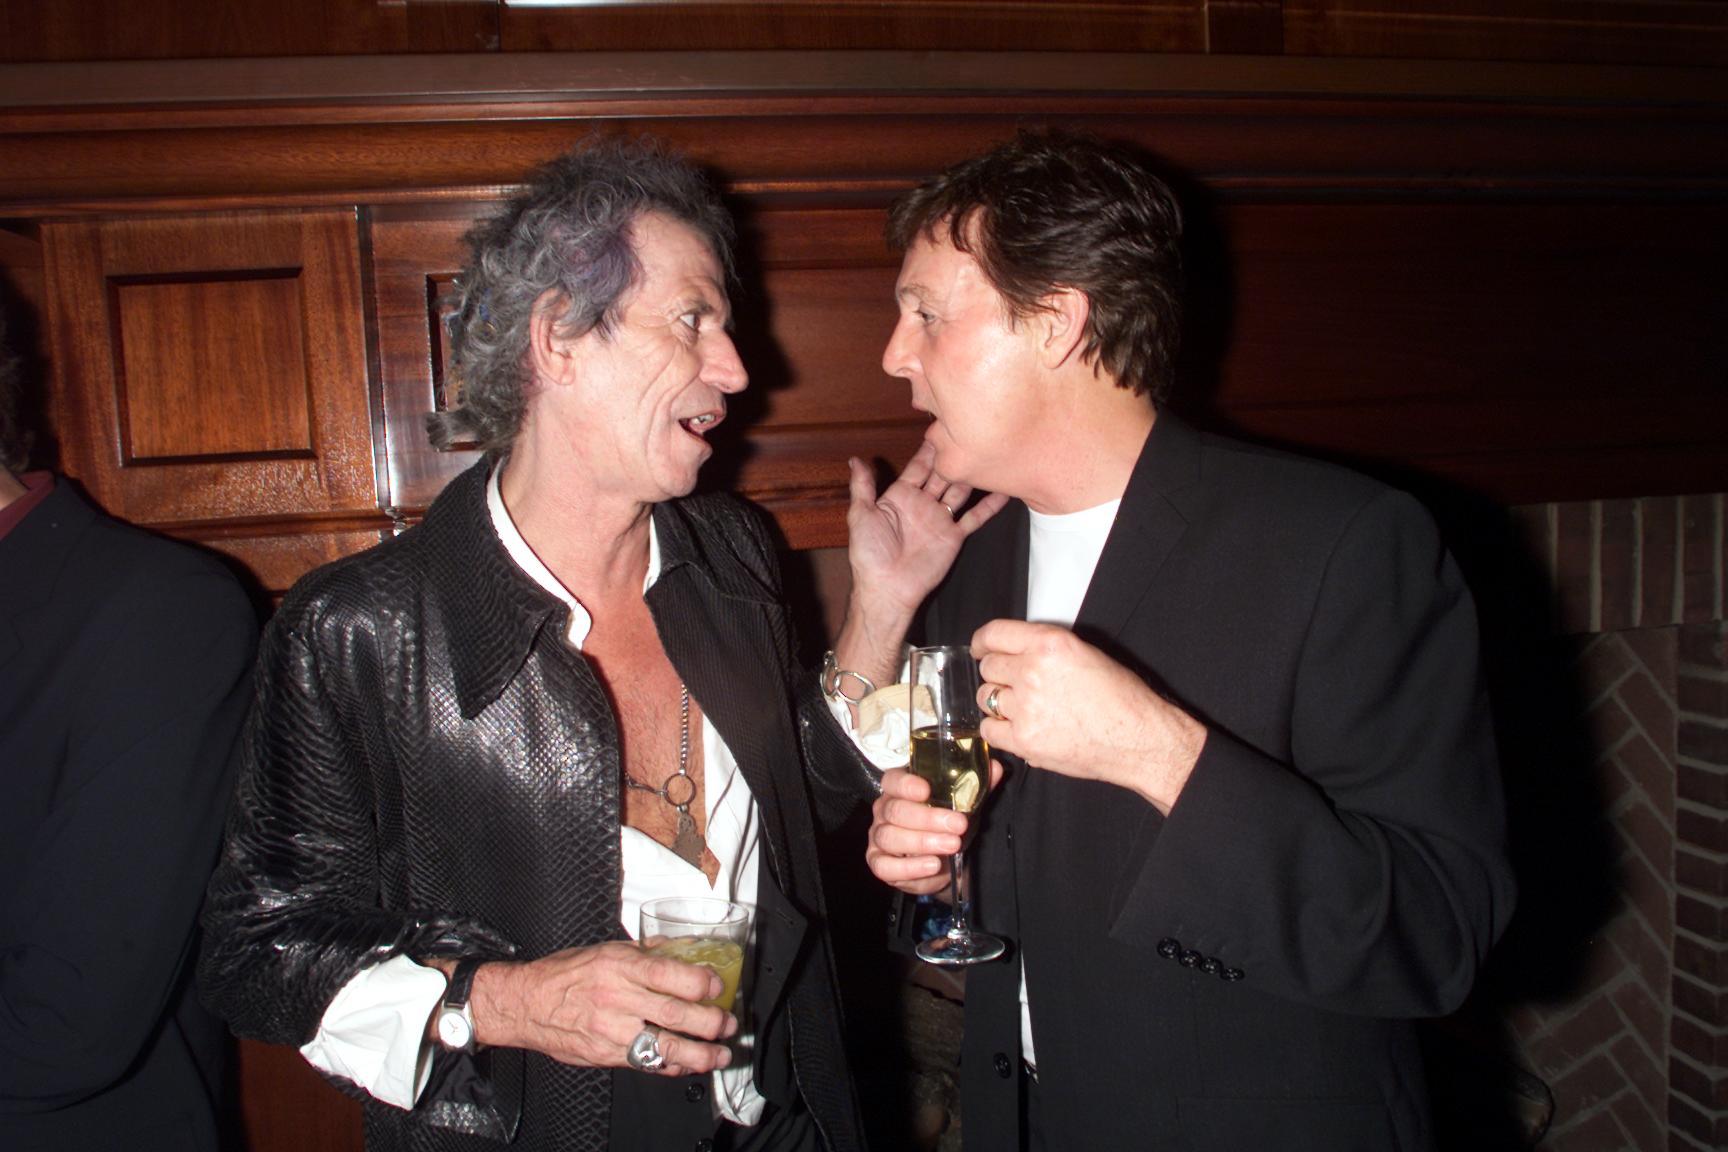 Keith Richards of The Rolling Stones and Paul McCartney of The Beatles talk during a party for the 2000 VH1 Vogue Fashion awards